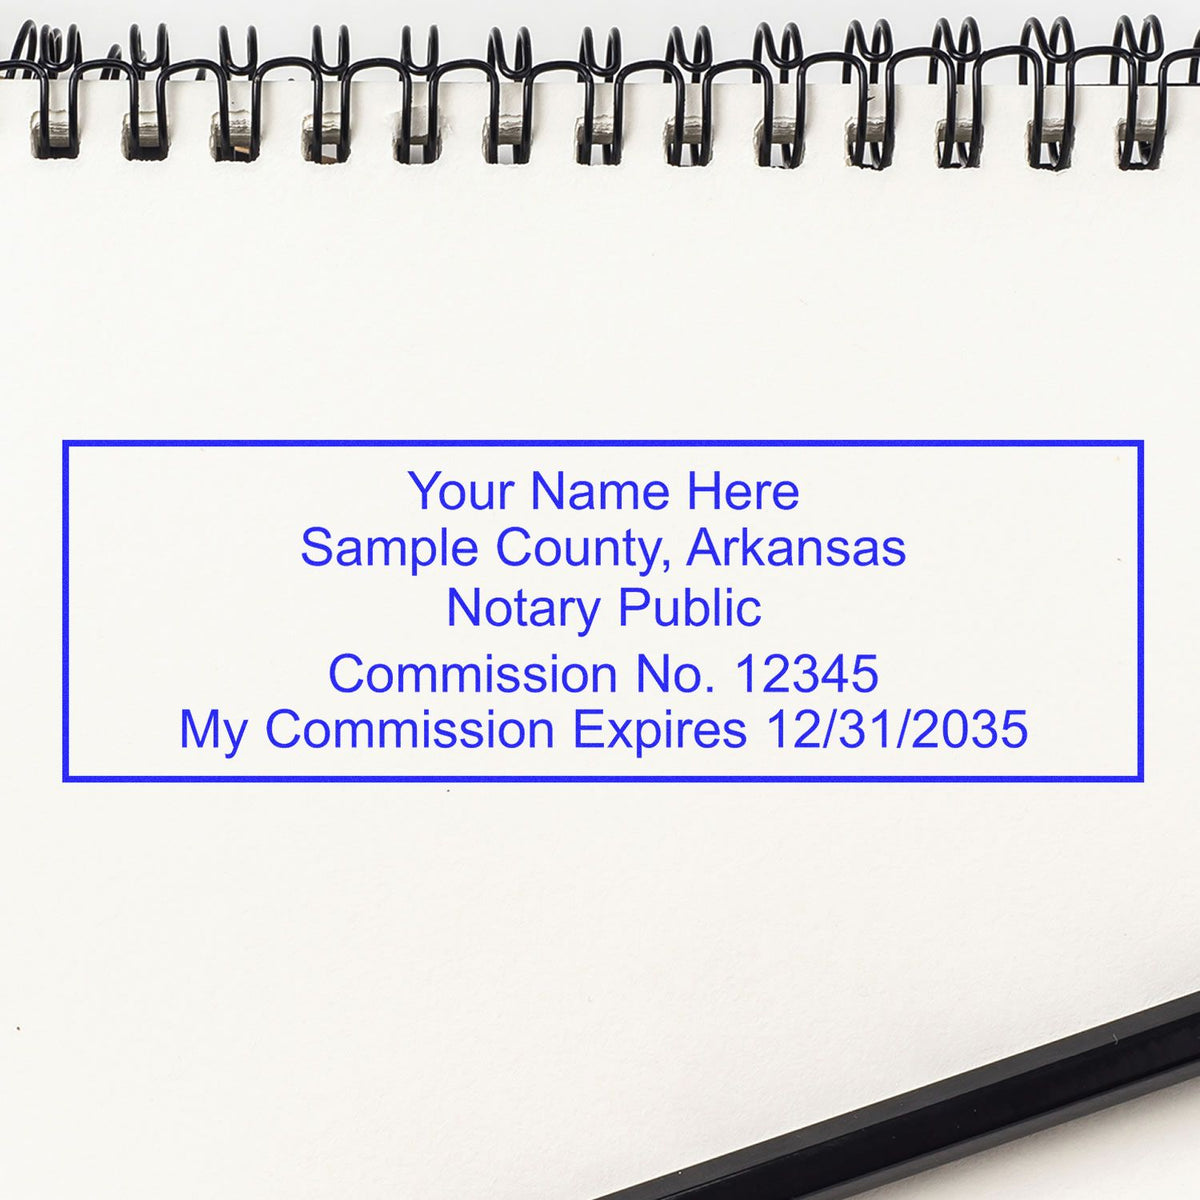 Another Example of a stamped impression of the Super Slim Arkansas Notary Public Stamp on a piece of office paper.